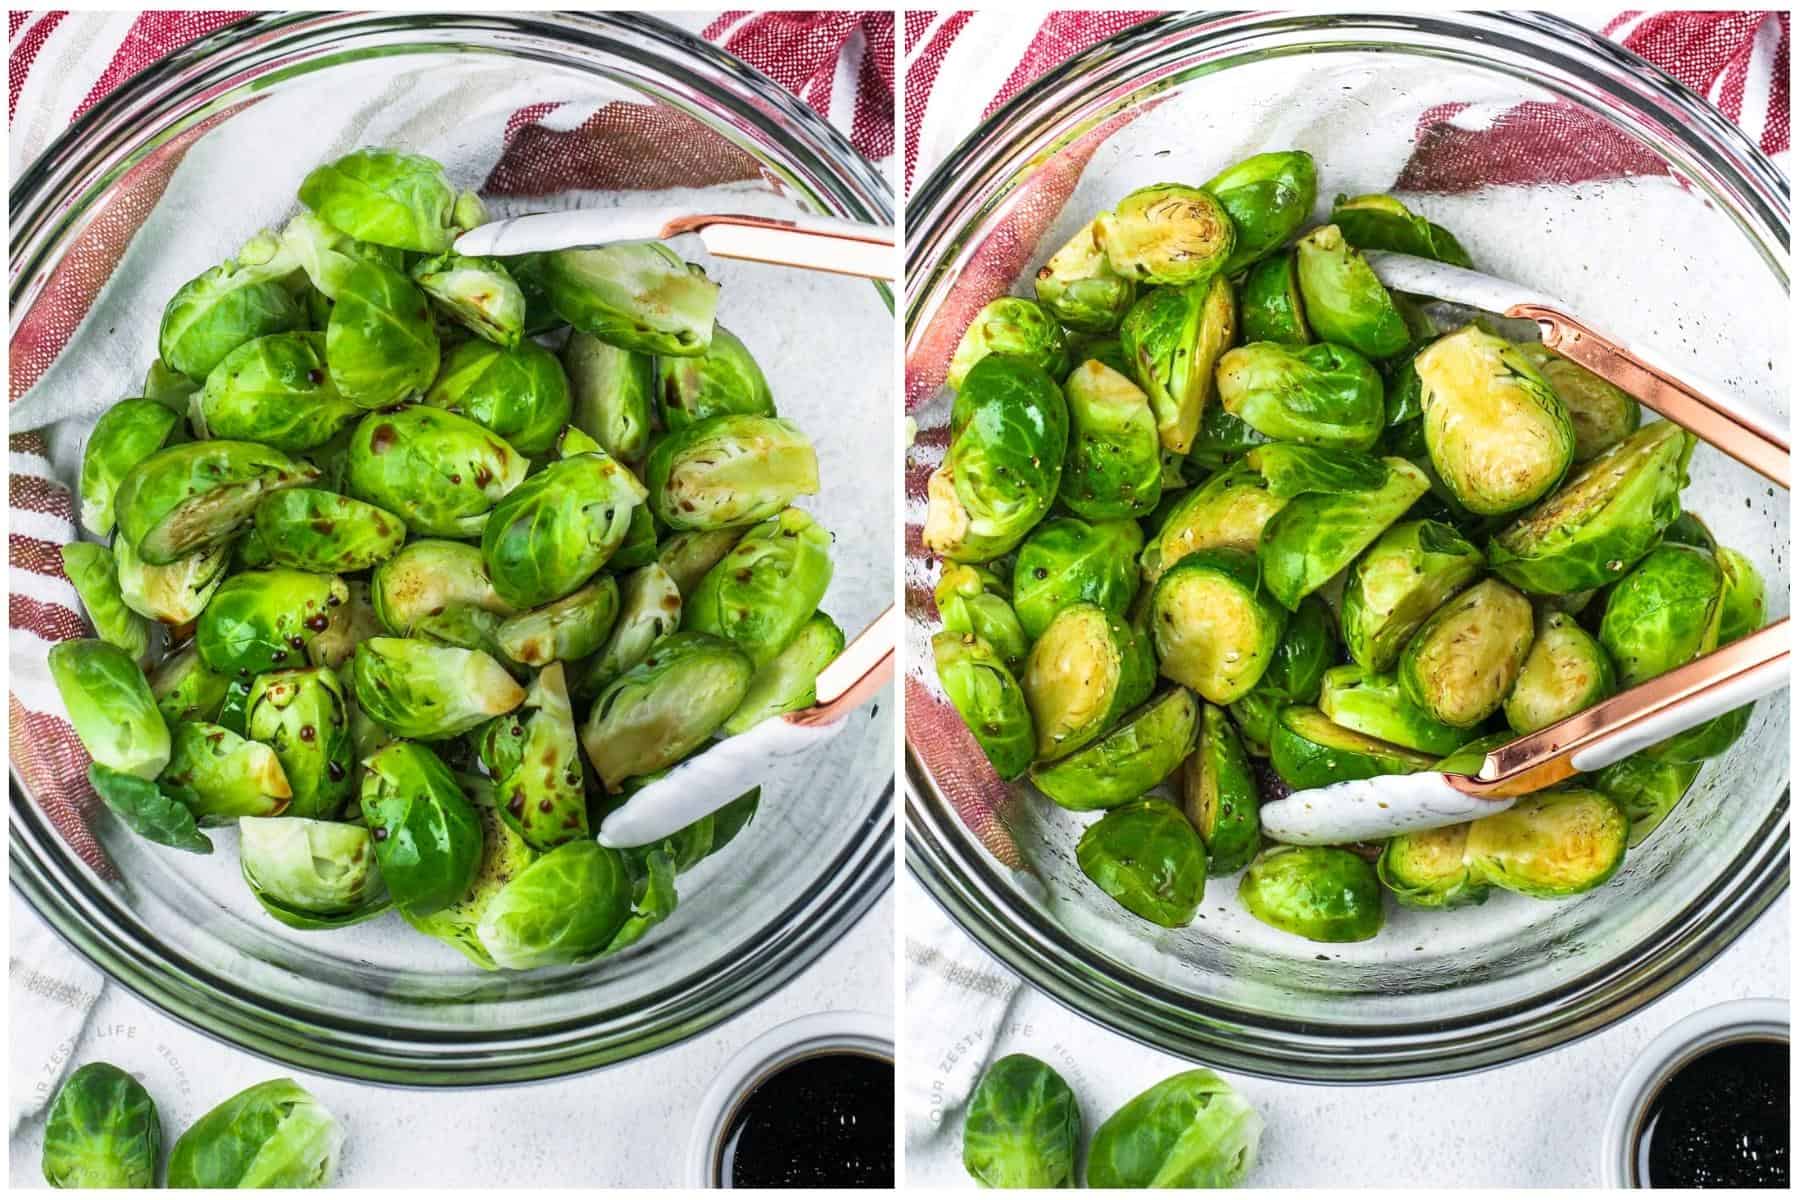 balsamic vinegar on brussels in a clear bowl, and brussels mixed up